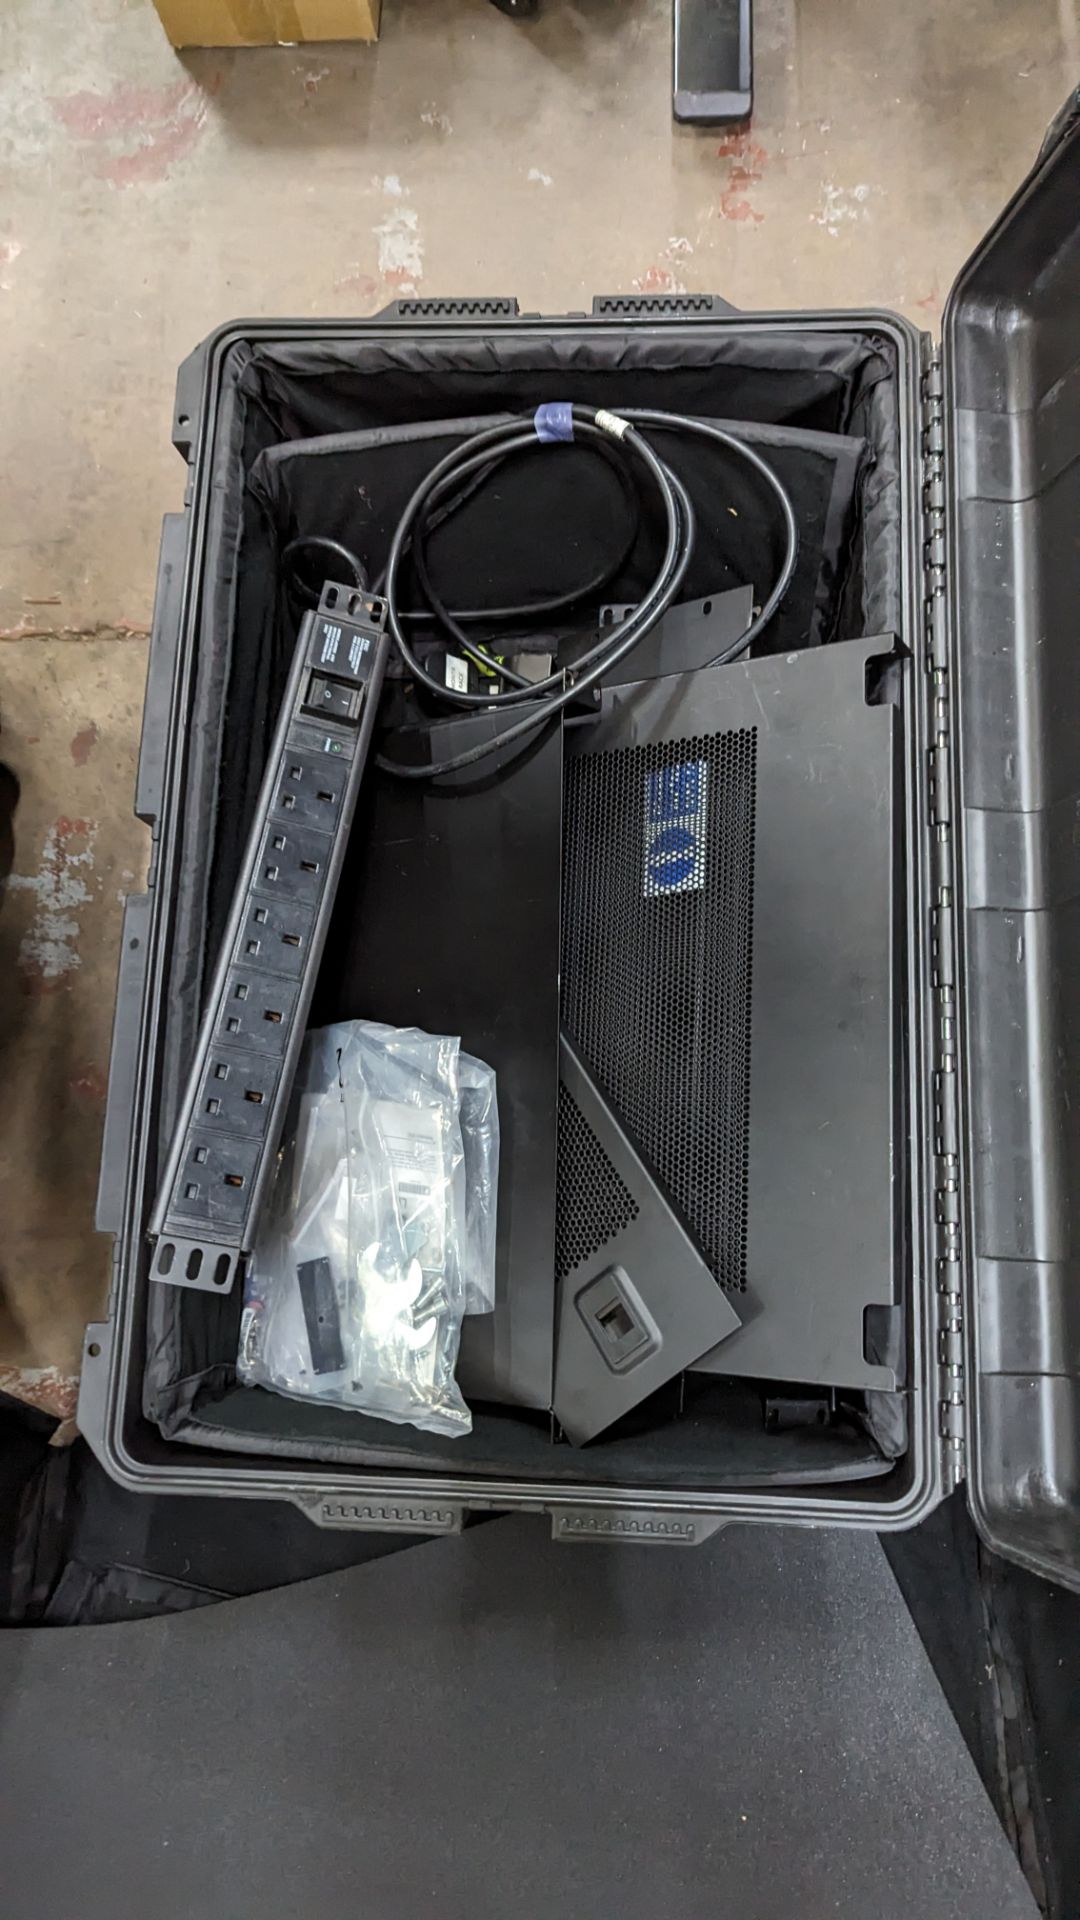 Pelican Pelistorm case with pull-out handle & wheels plus contents of 19" rack patch SDI patch panel - Image 12 of 17